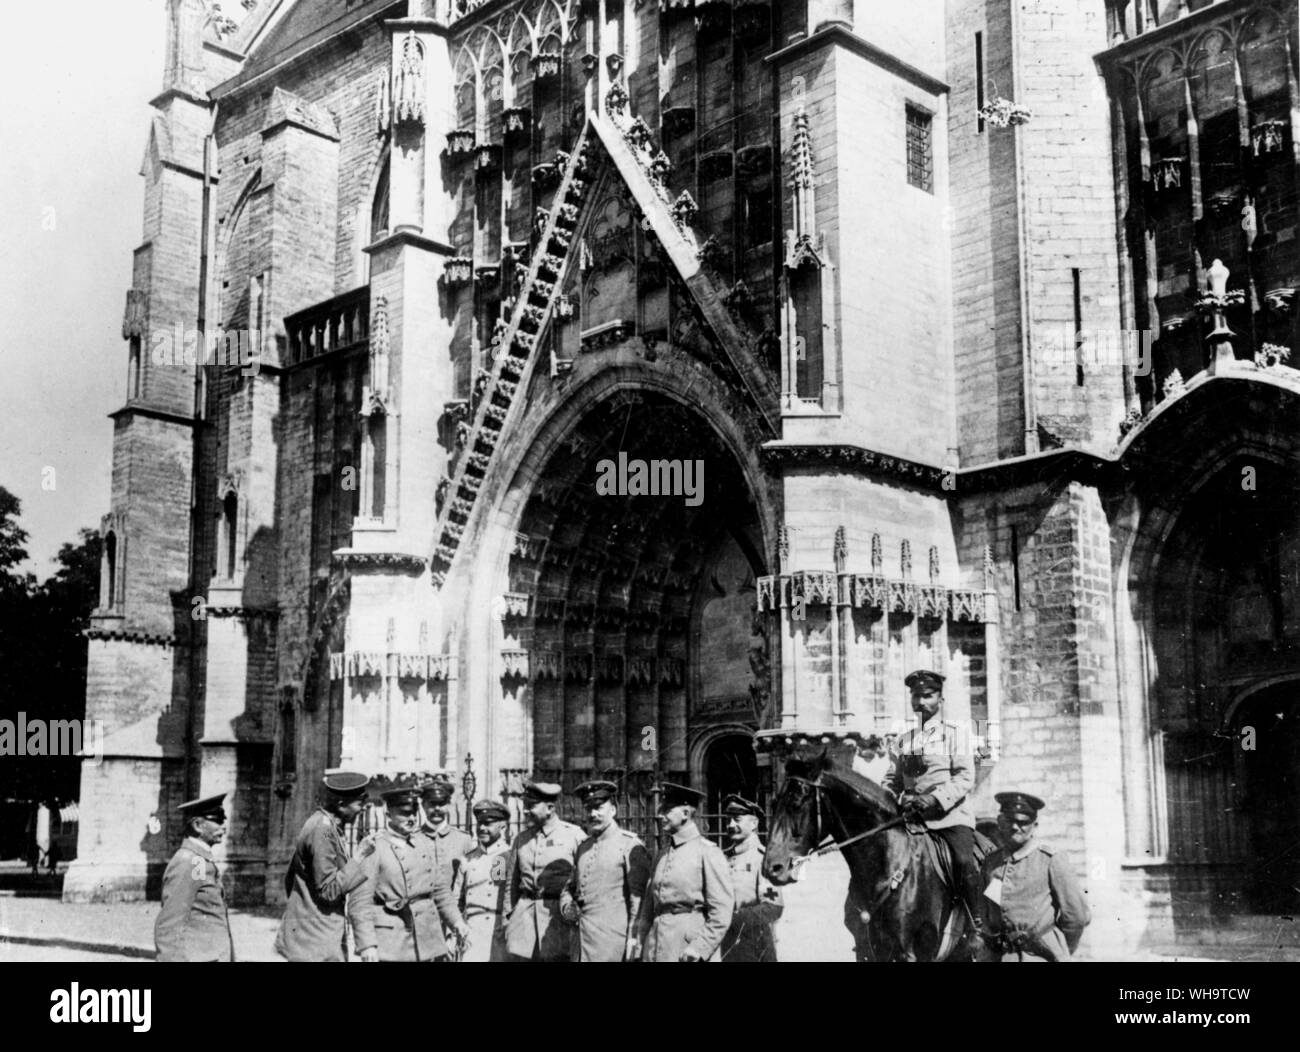 WW1: Troops gather outside the entrance to the Hotel de Ville, Louvain, Sept. 1914. Stock Photo